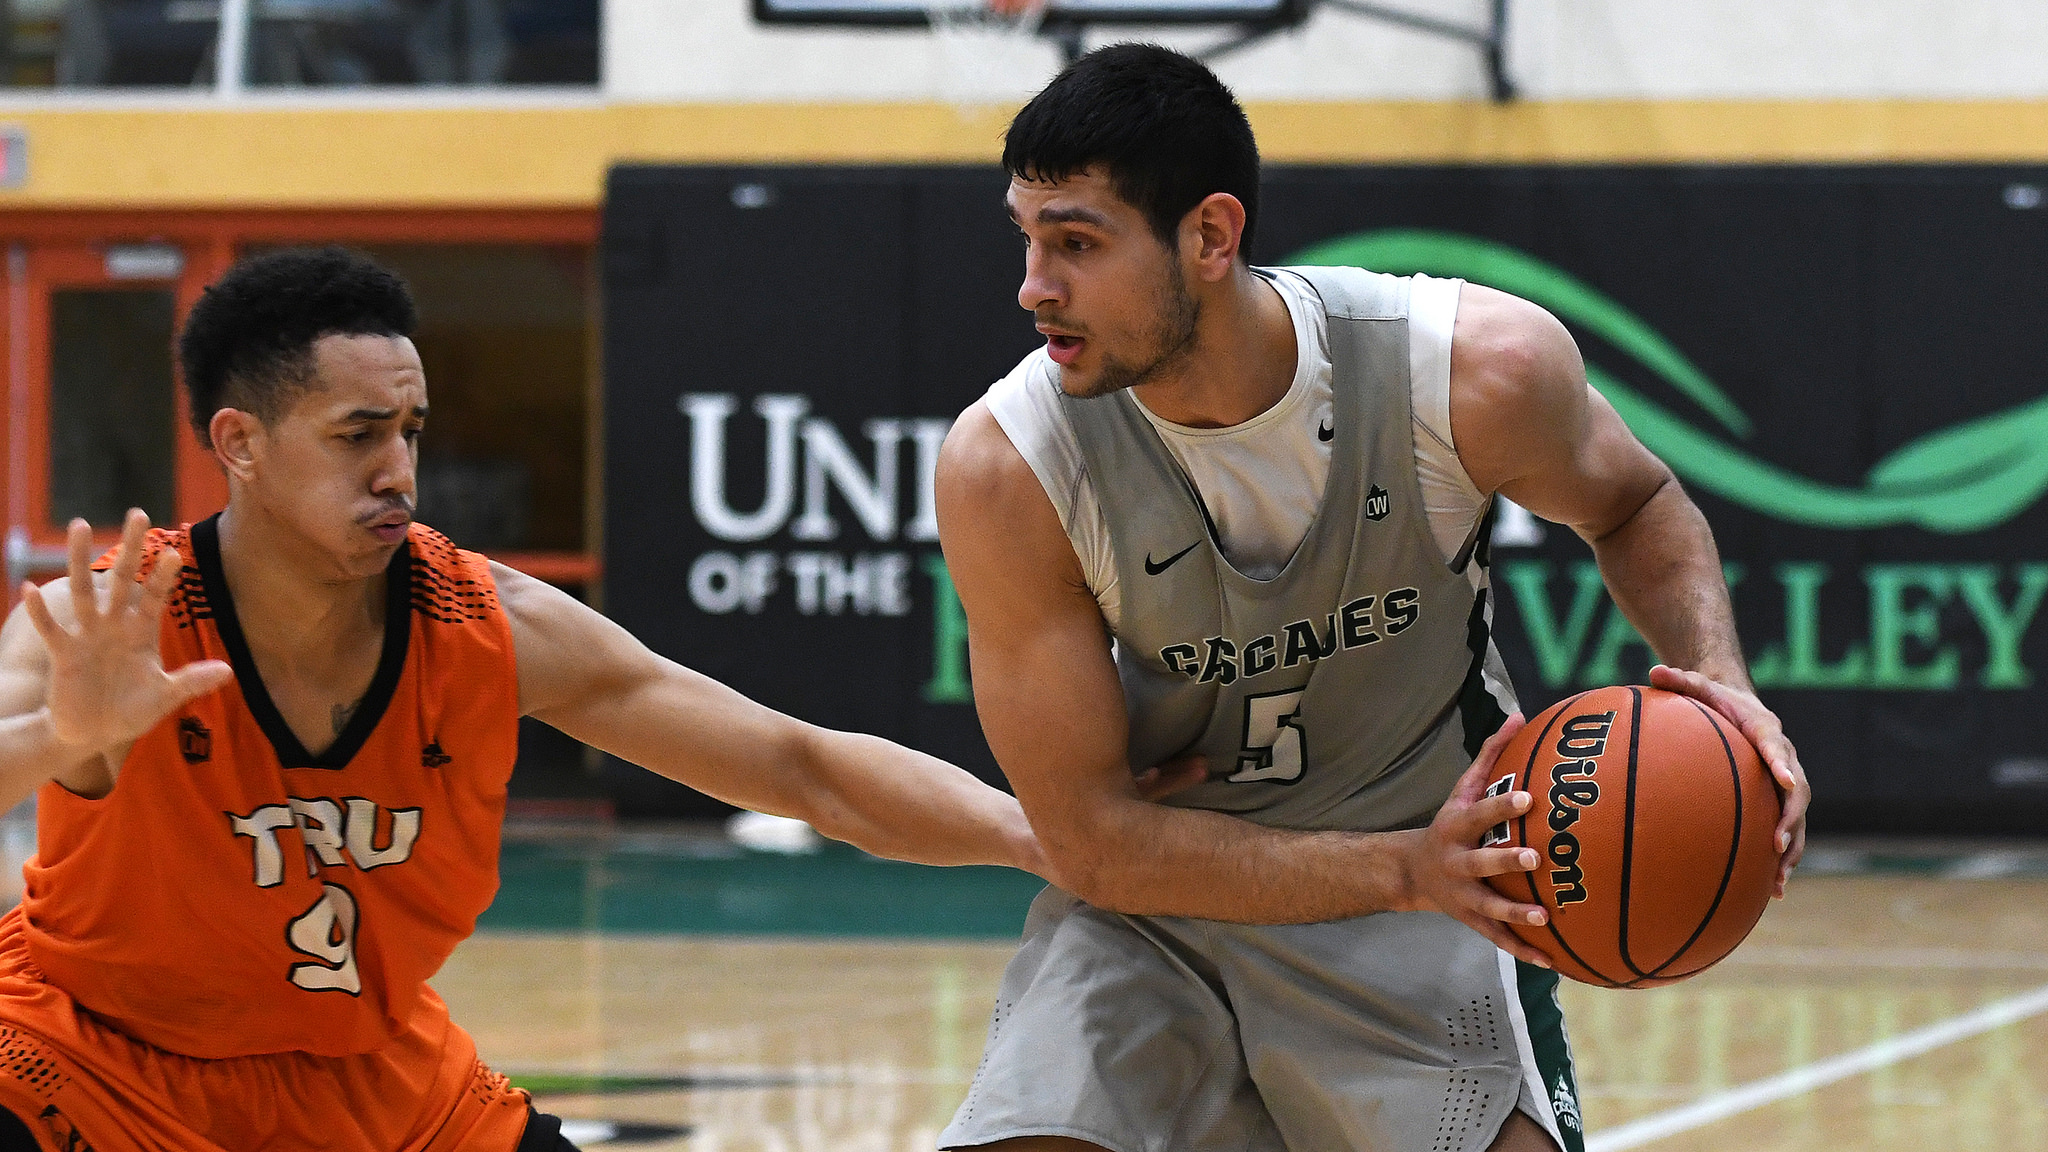 Cascades and Wolfpack each sport a win and loss after exciting weekend of hoops